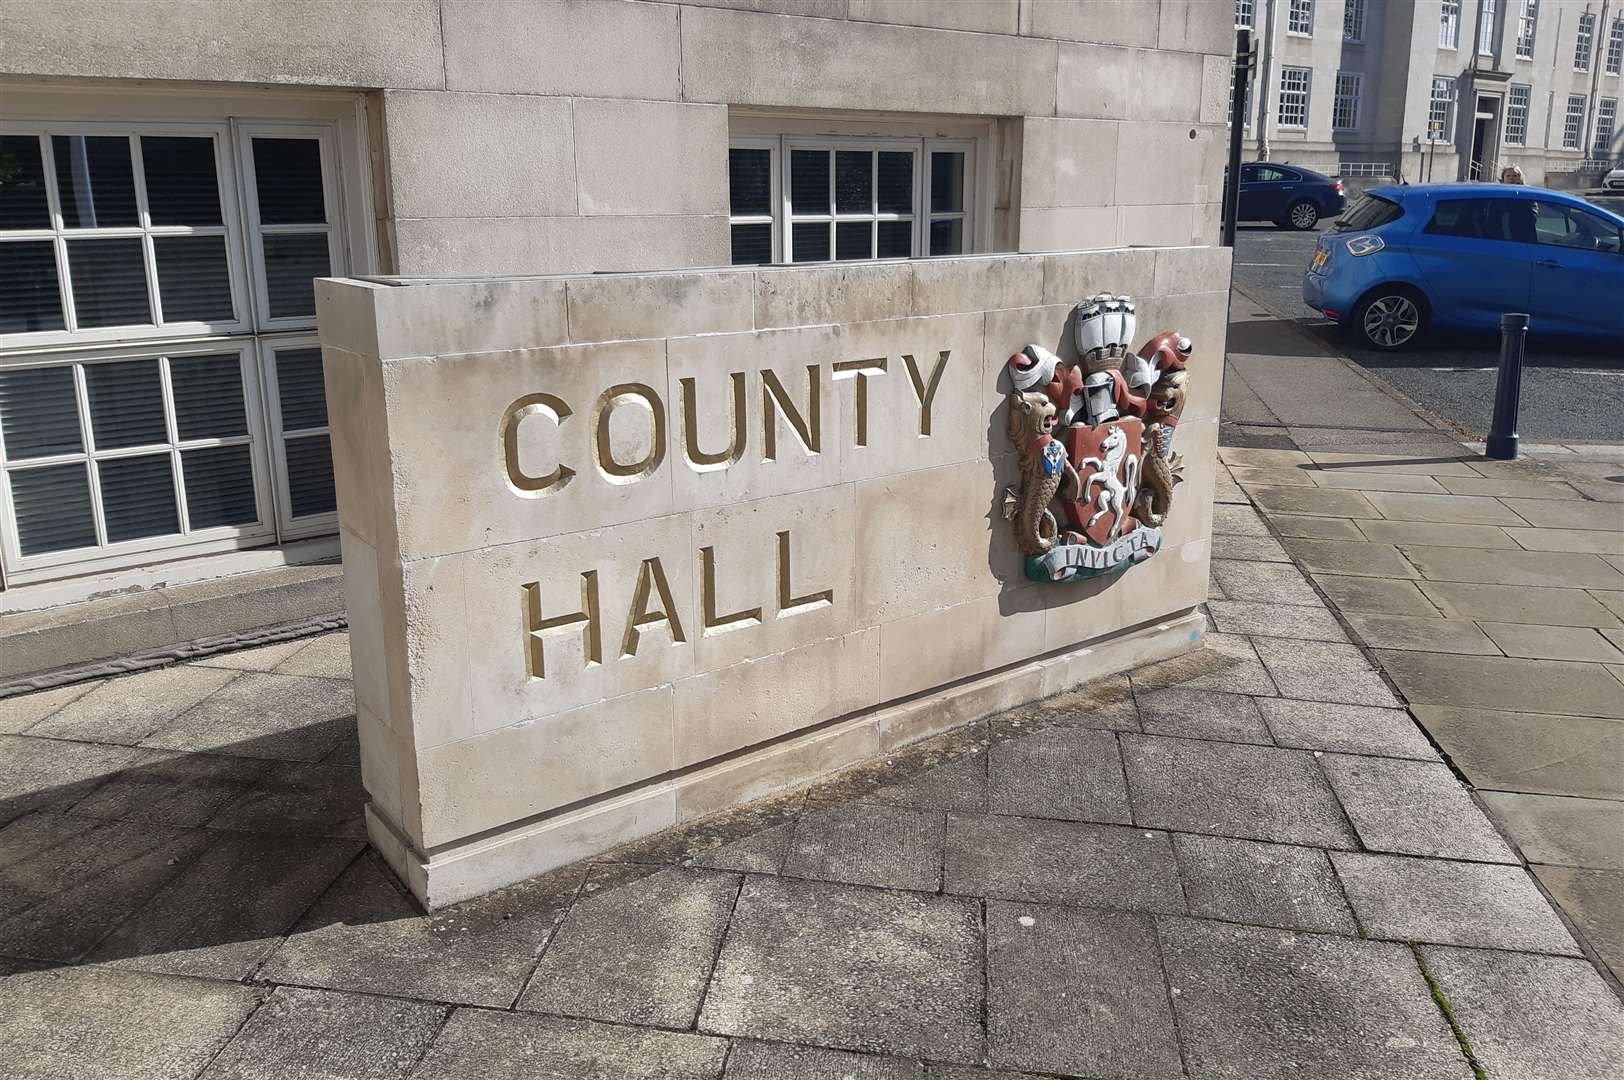 The inquest took place at County Hall in Maidstone